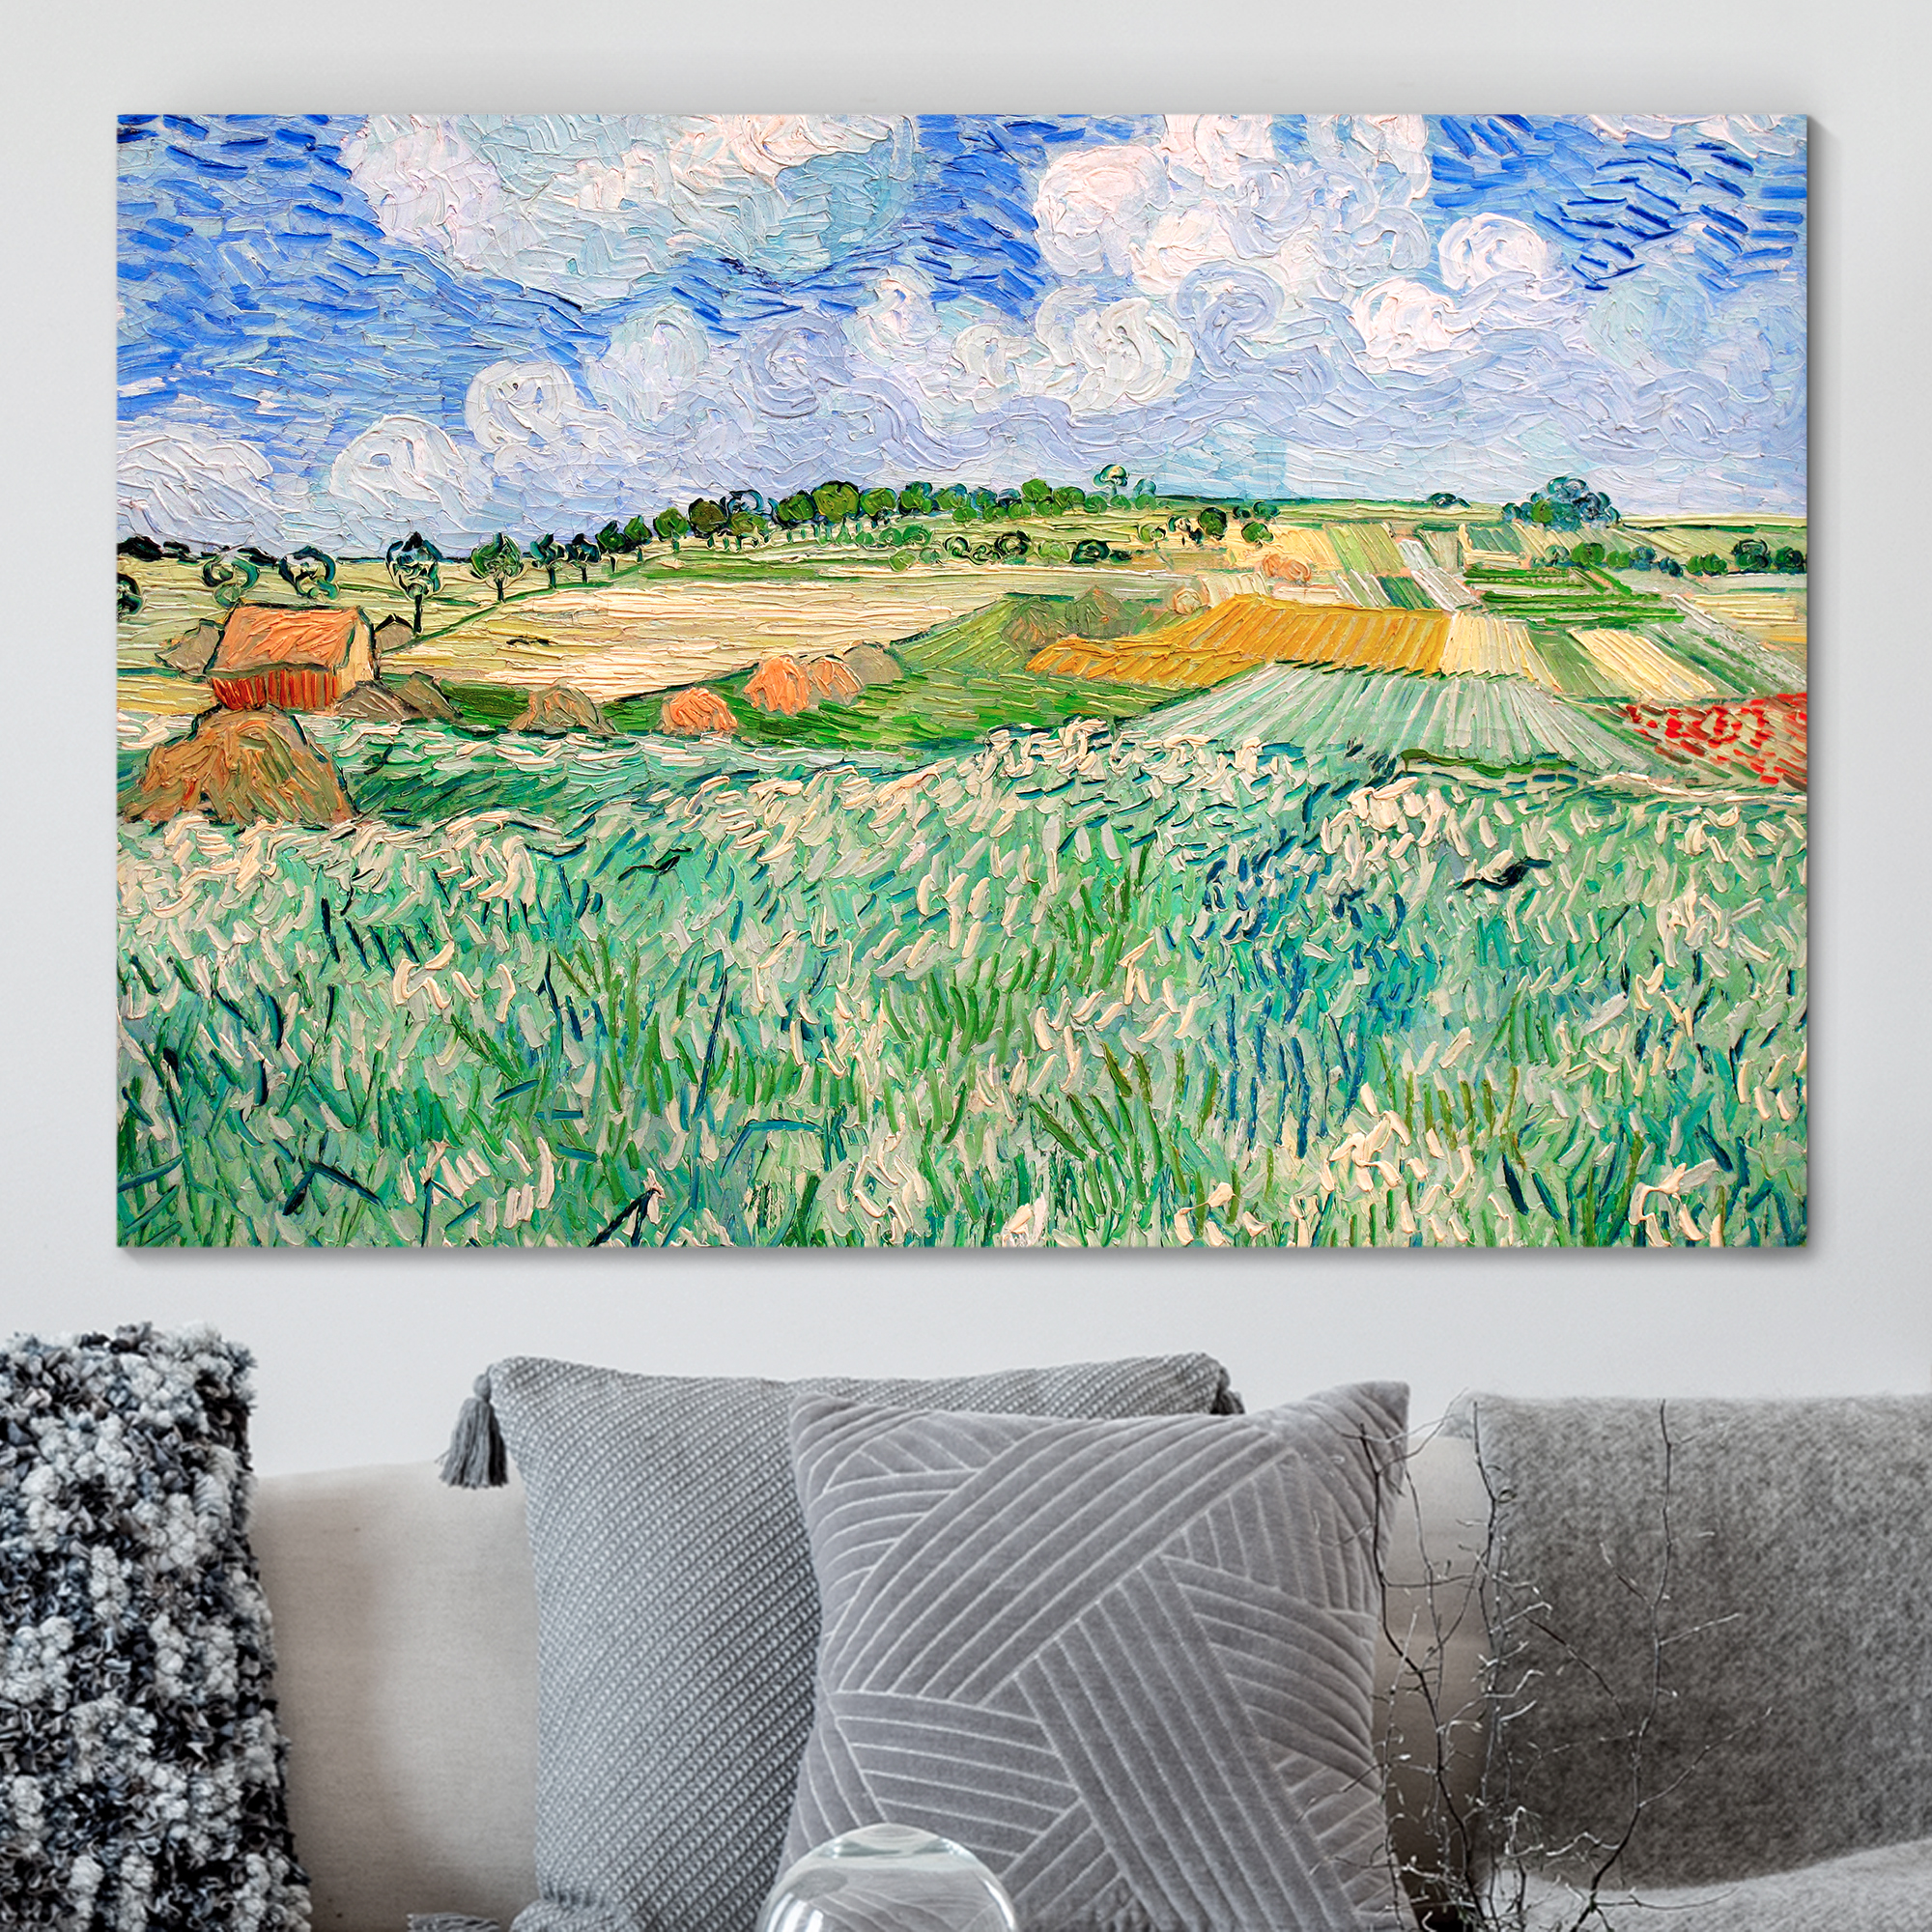 Plain near Auvers by Vincent Van Gogh - Oil Painting Reproduction on Canvas Prints Wall Art, Ready to Hang - 32